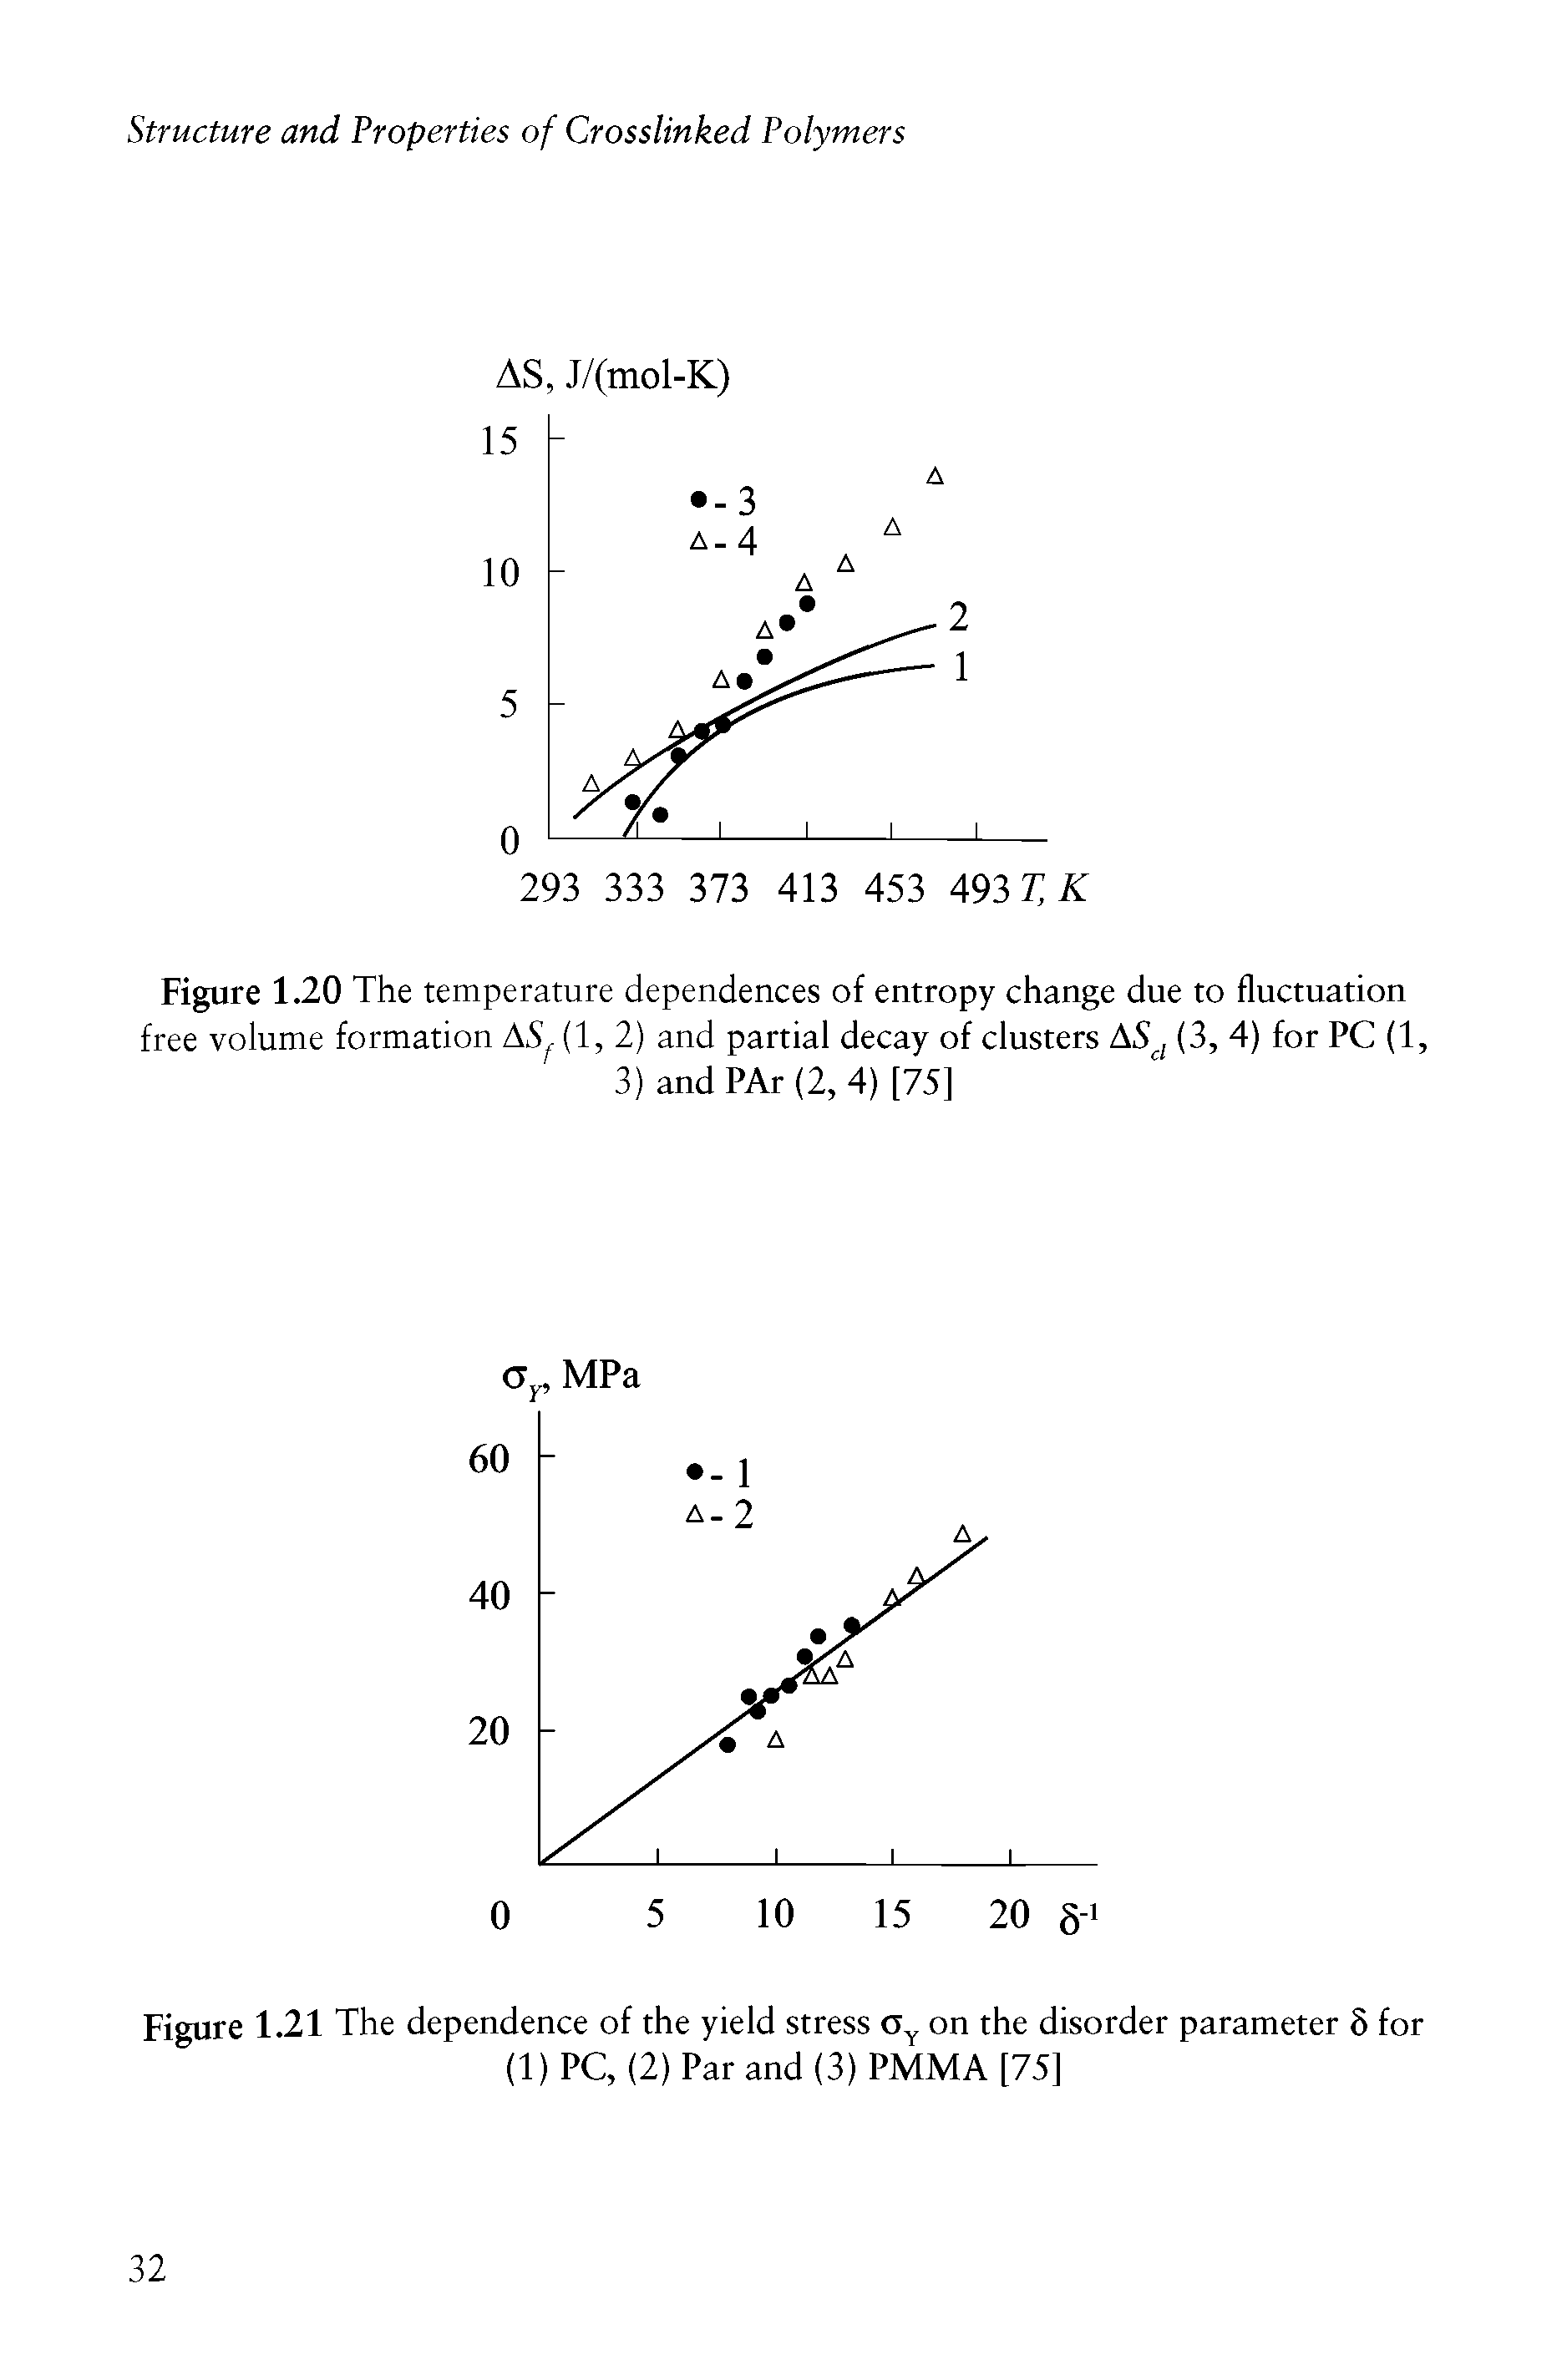 Figure 1.20 The temperature dependences of entropy change due to fluctuation free volume formation AS (1, 2) and partial decay of clusters (3, 4) for PC (1,...